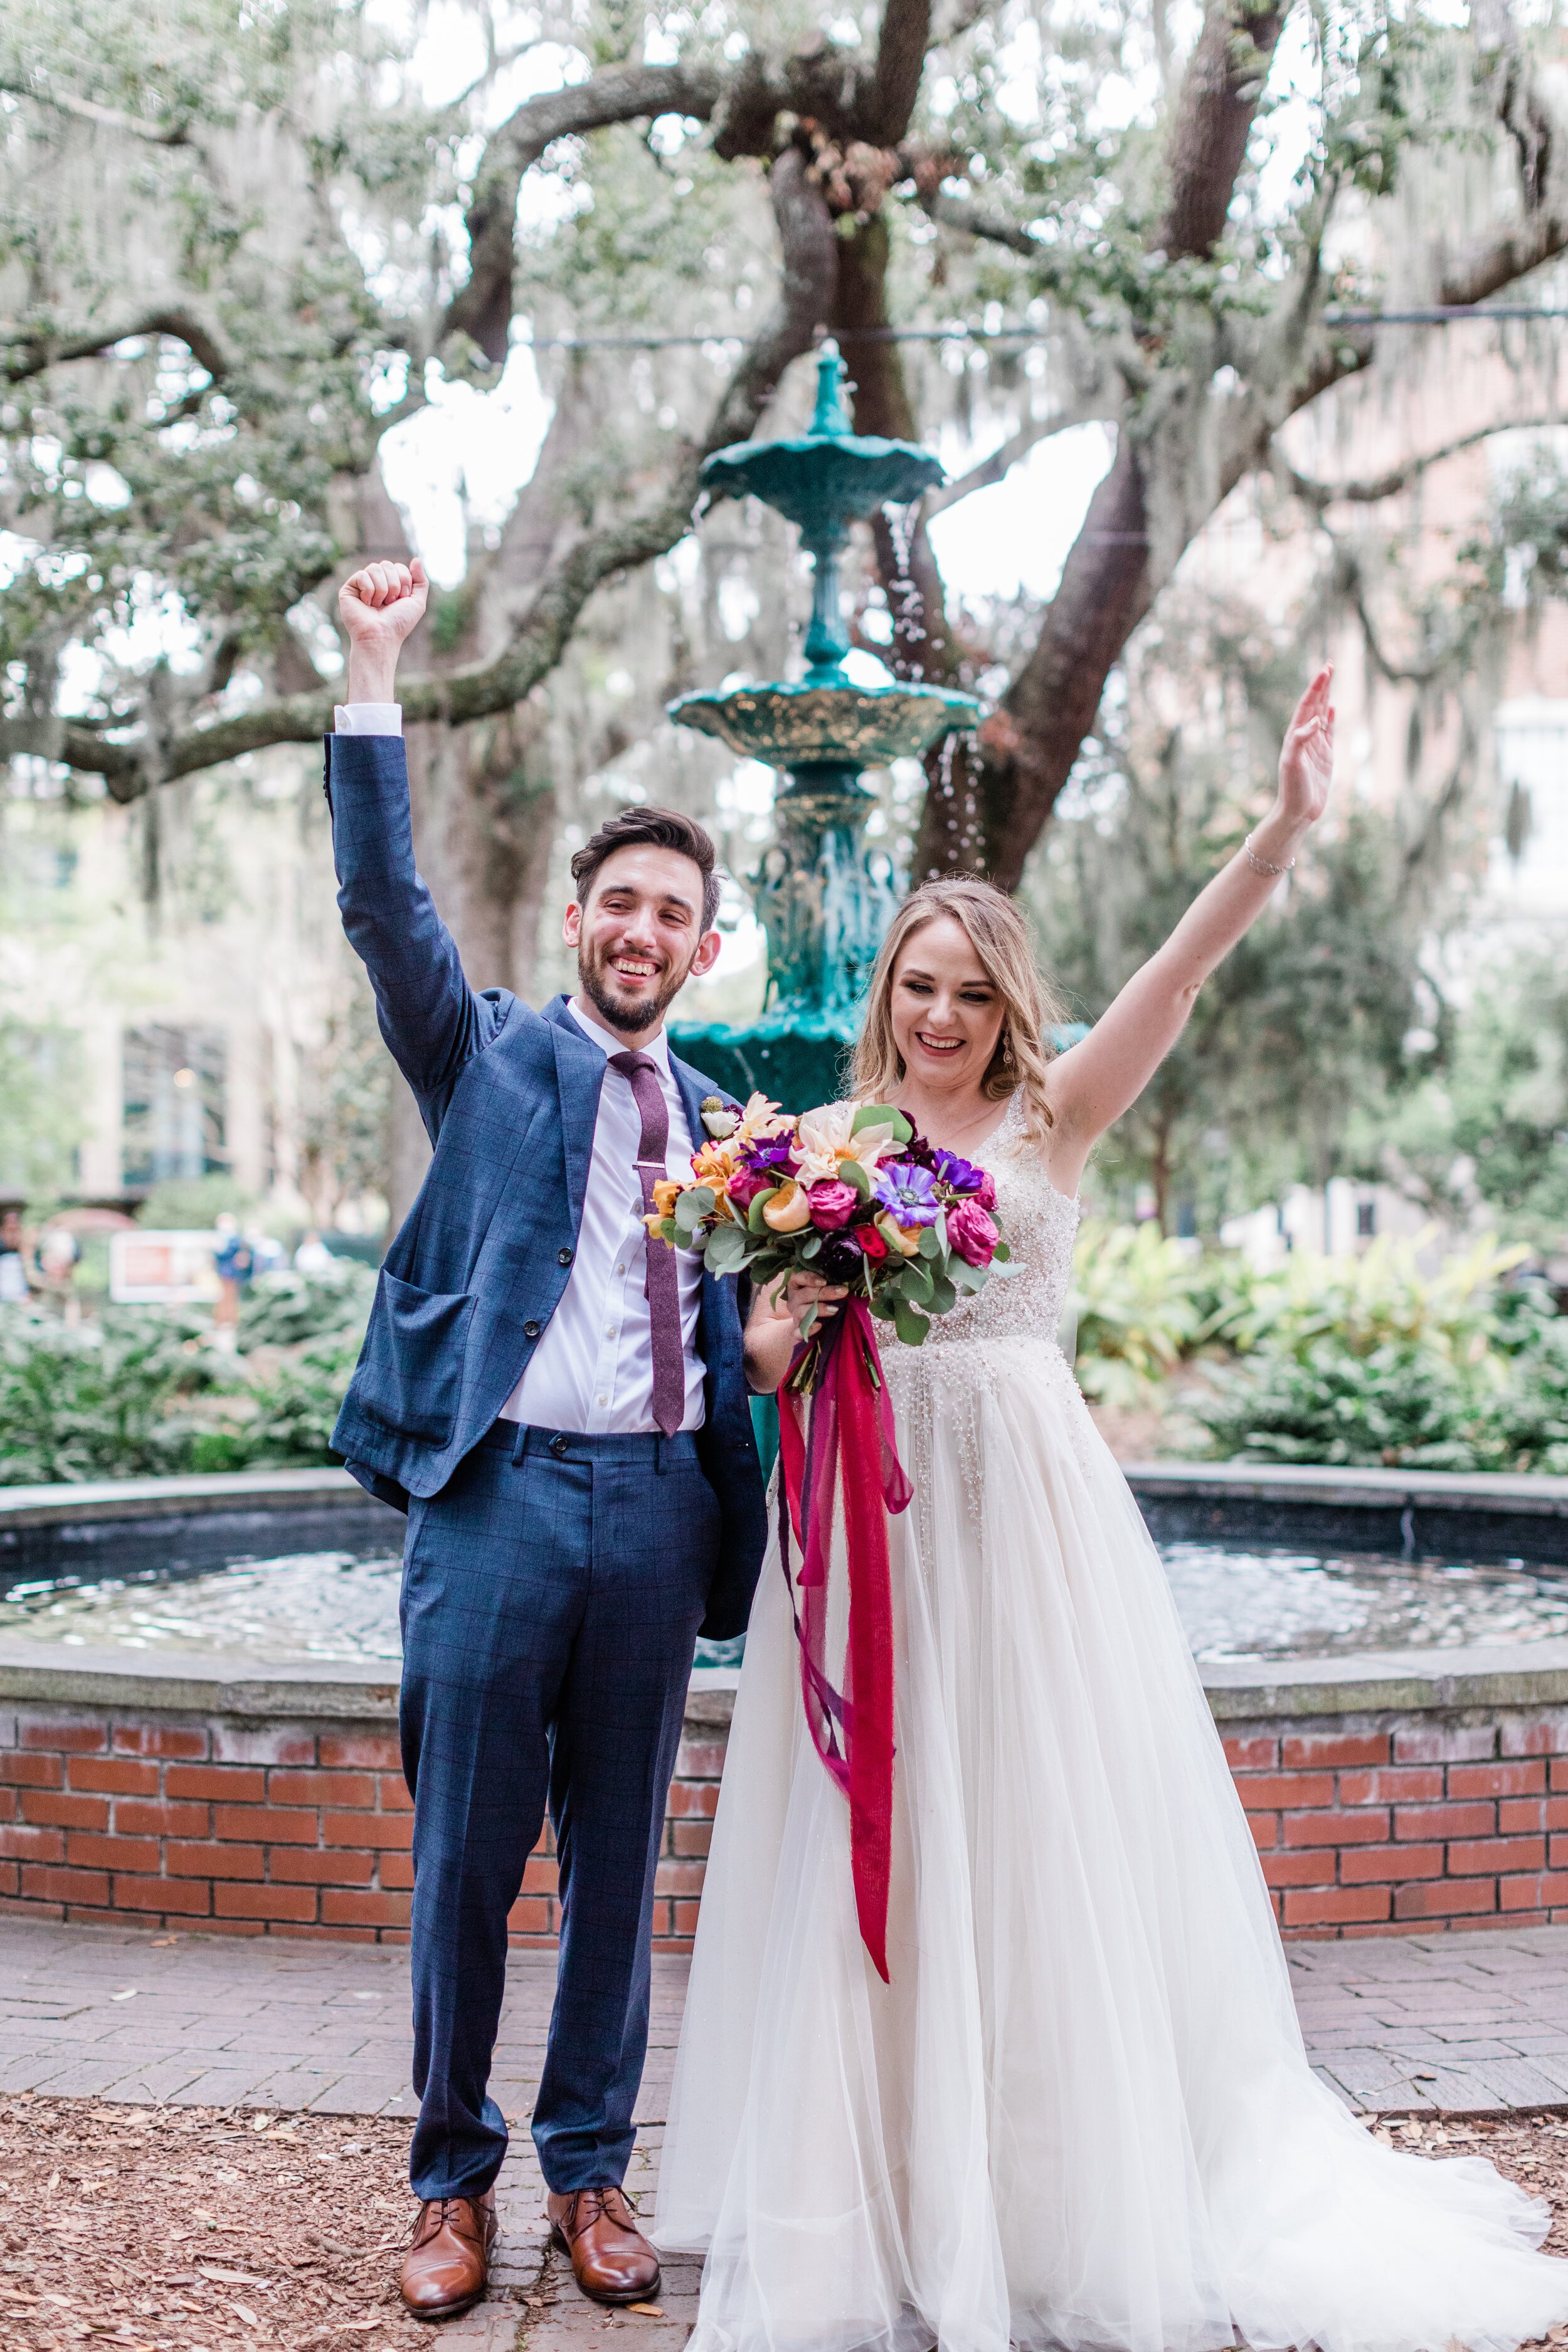 ivory-and-beau-florals-ashley-and-gerald-elopement-flowers-elope-savannah-elopement-package-flowers-florals-florist-savannah-florist-wedding-florist-bright-colorful-flowers-AptBPhoto_AshleyGerard-151.jpg